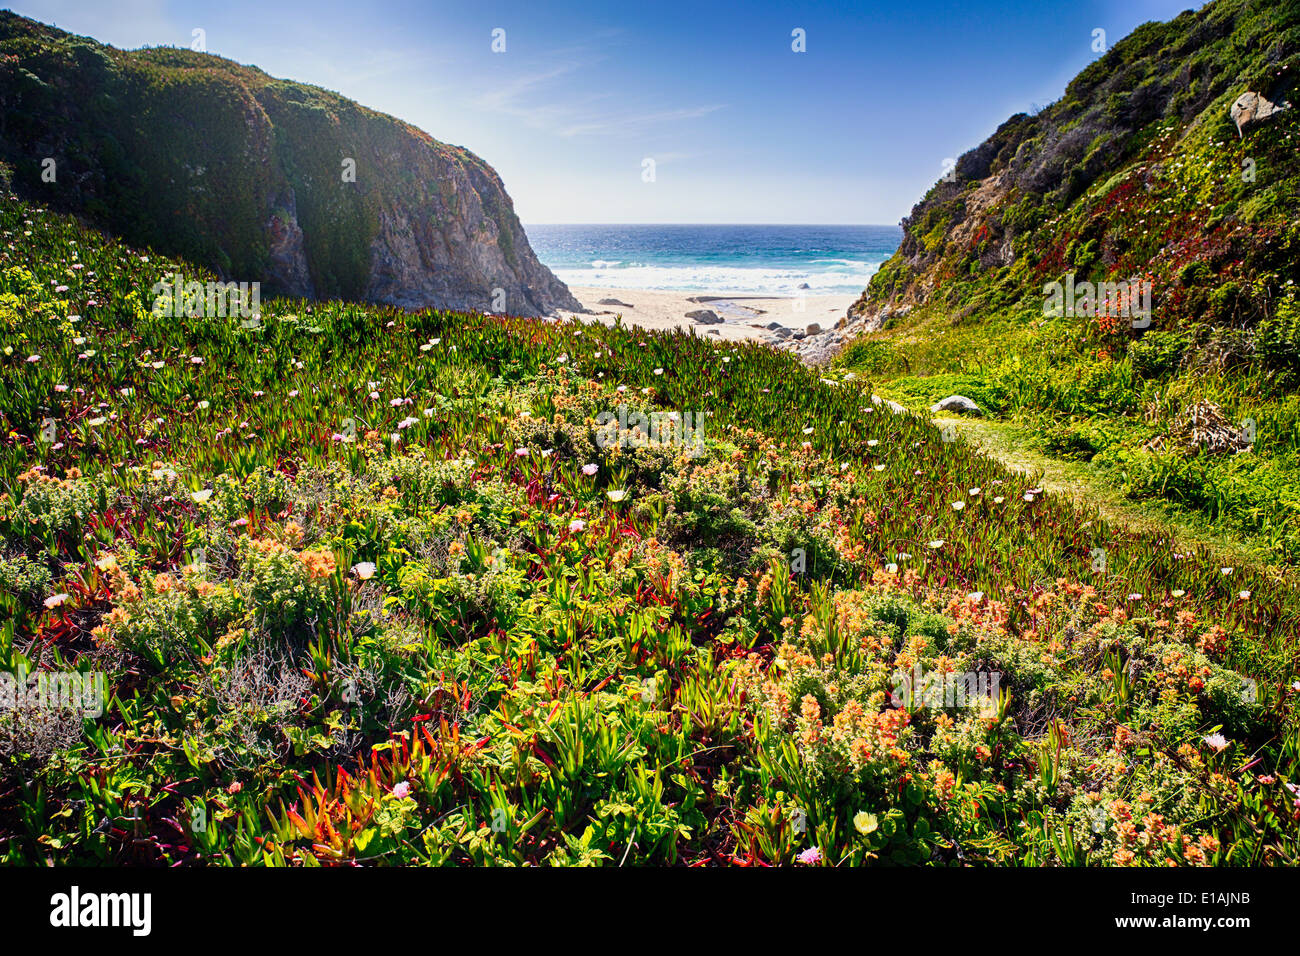 LowAngle View of a Coastal Meadow with Blooming Wildflowers, Graapate State Park, Big Sur, California Stock Photo